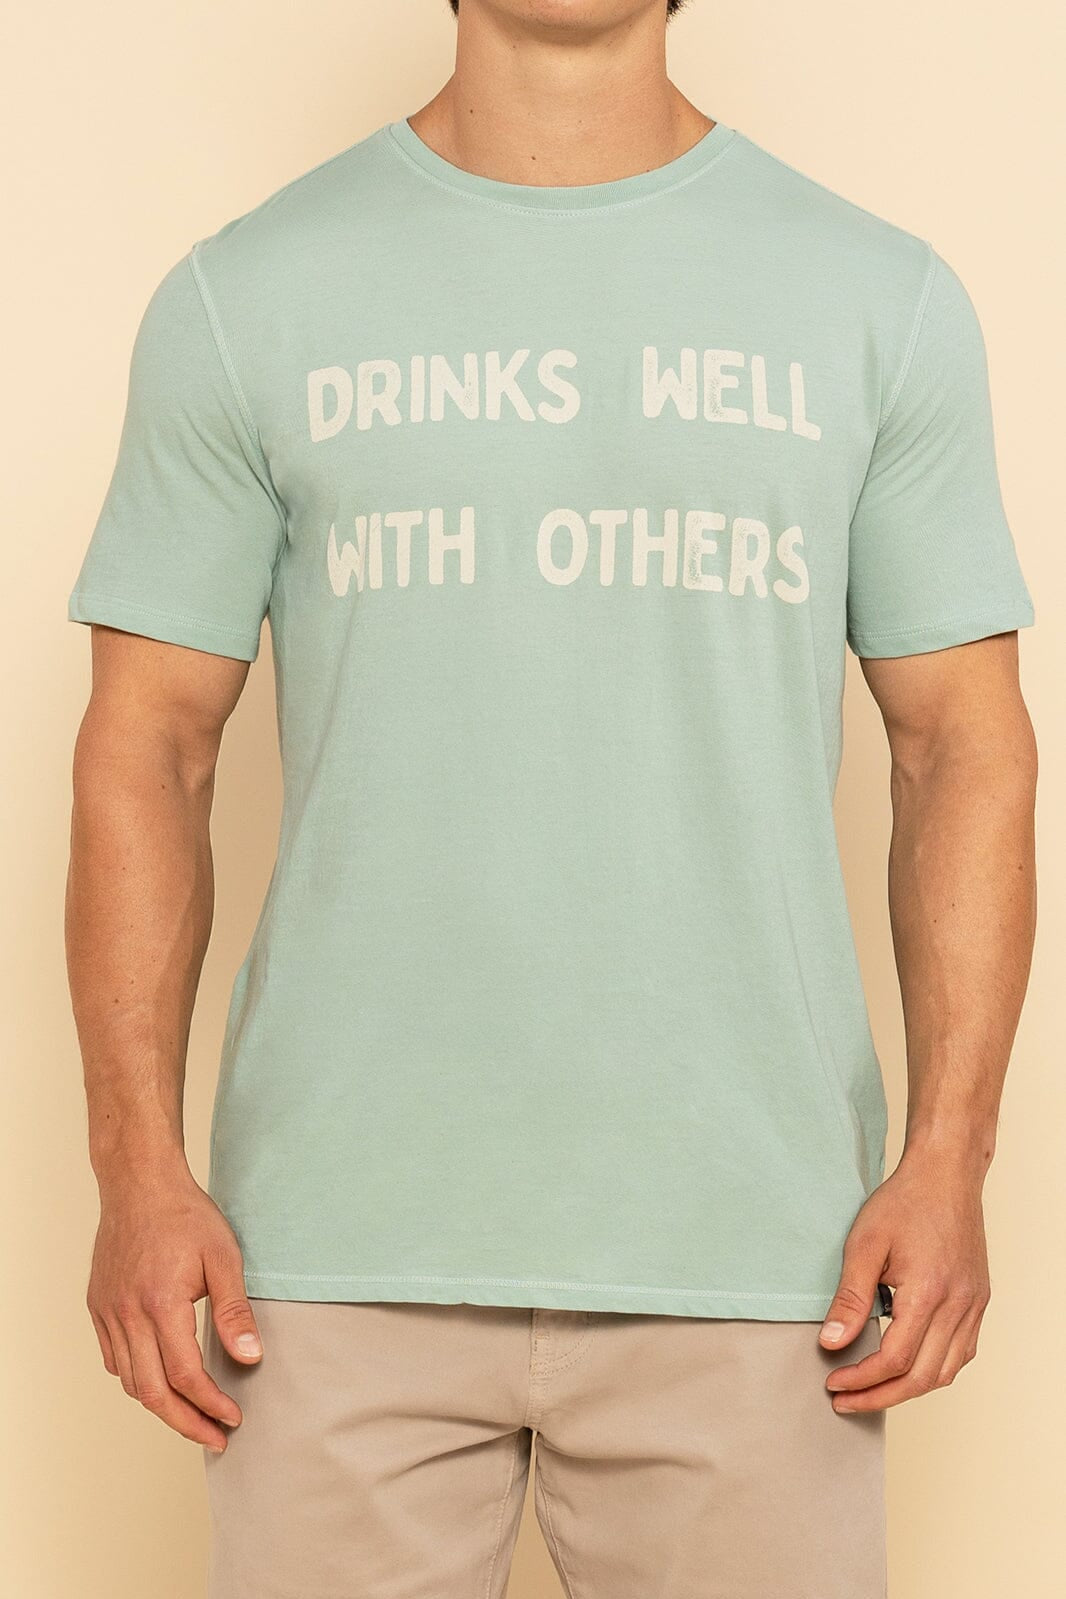 Drinks Well With Others Tee For Men